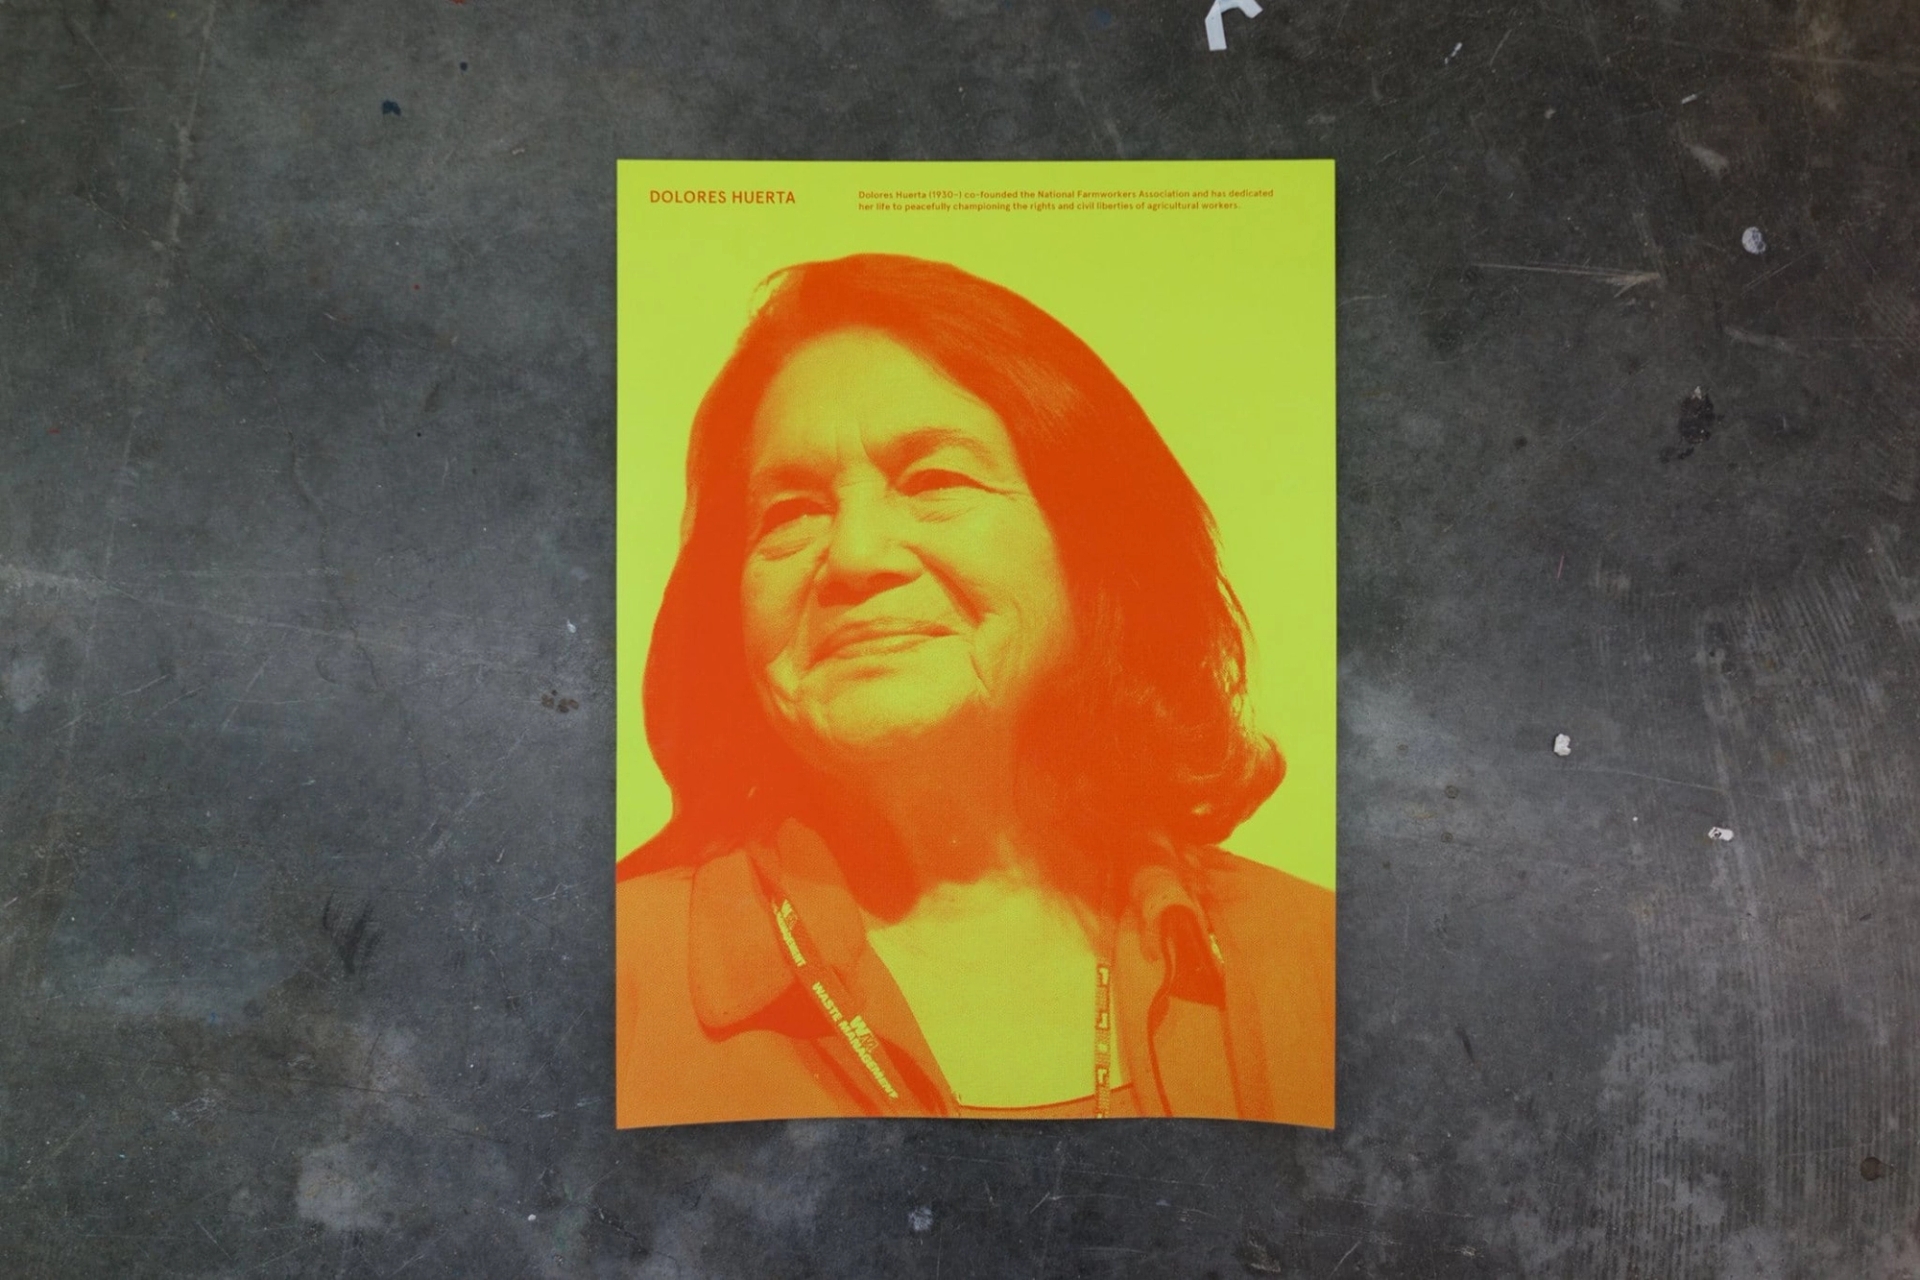 Dolores Huerta as depicted in the Unsung Heroes Portrait Series by Facebook's Analog Research Lab.